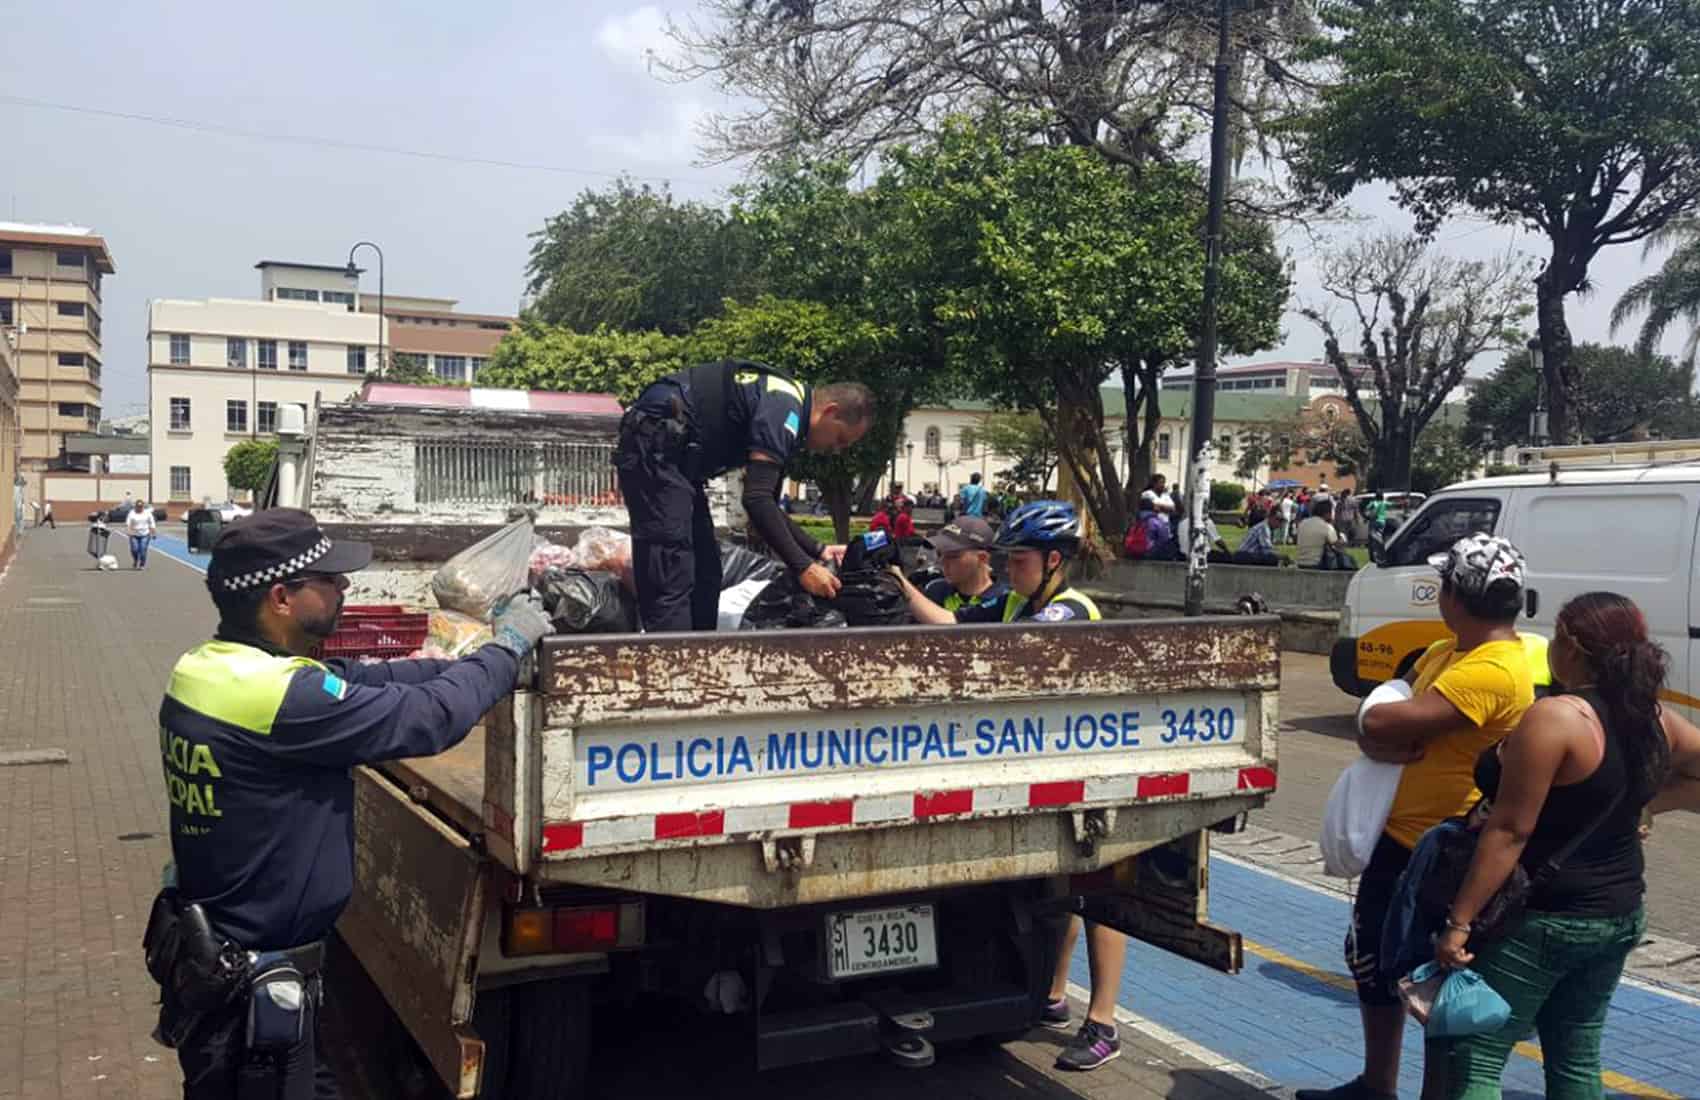 Municipal Police confiscates street vendor's goods. May 3, 2016.